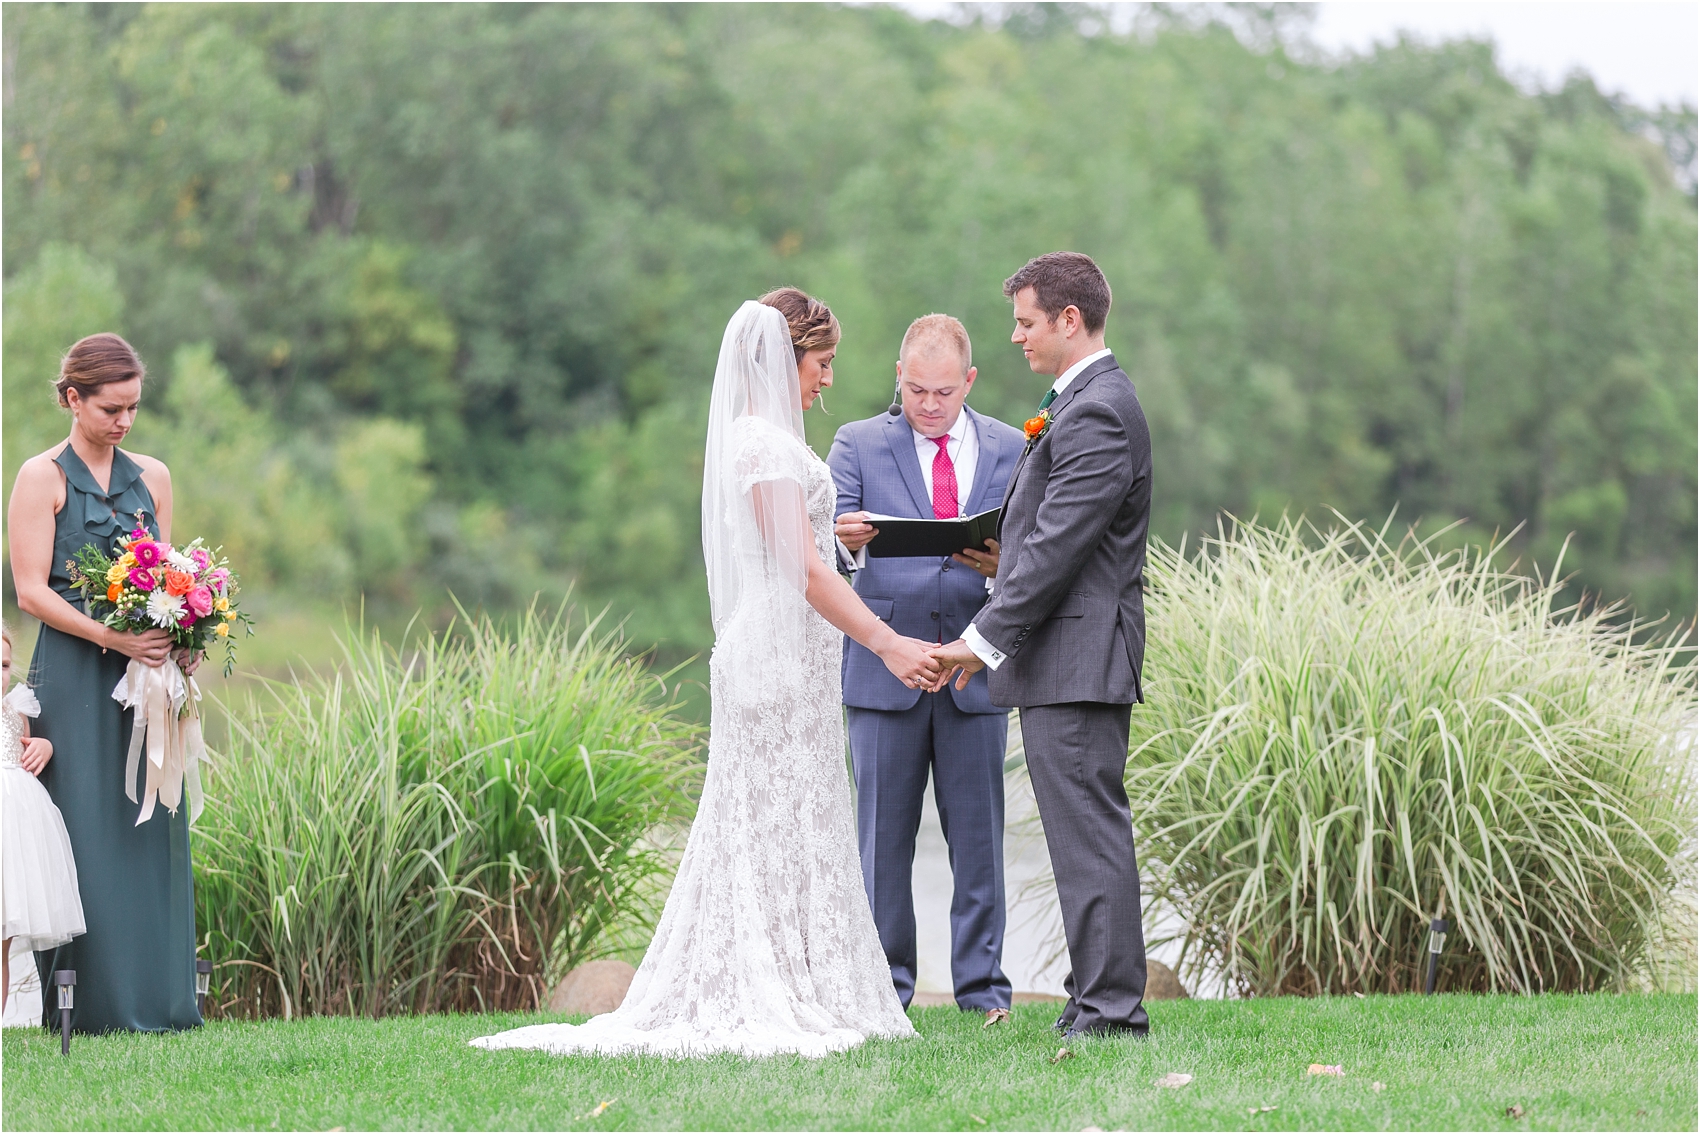 romantic-intimate-backyard-wedding-photos-at-private-estate-in-ann-arbor-mi-by-courtney-carolyn-photography_0097.jpg